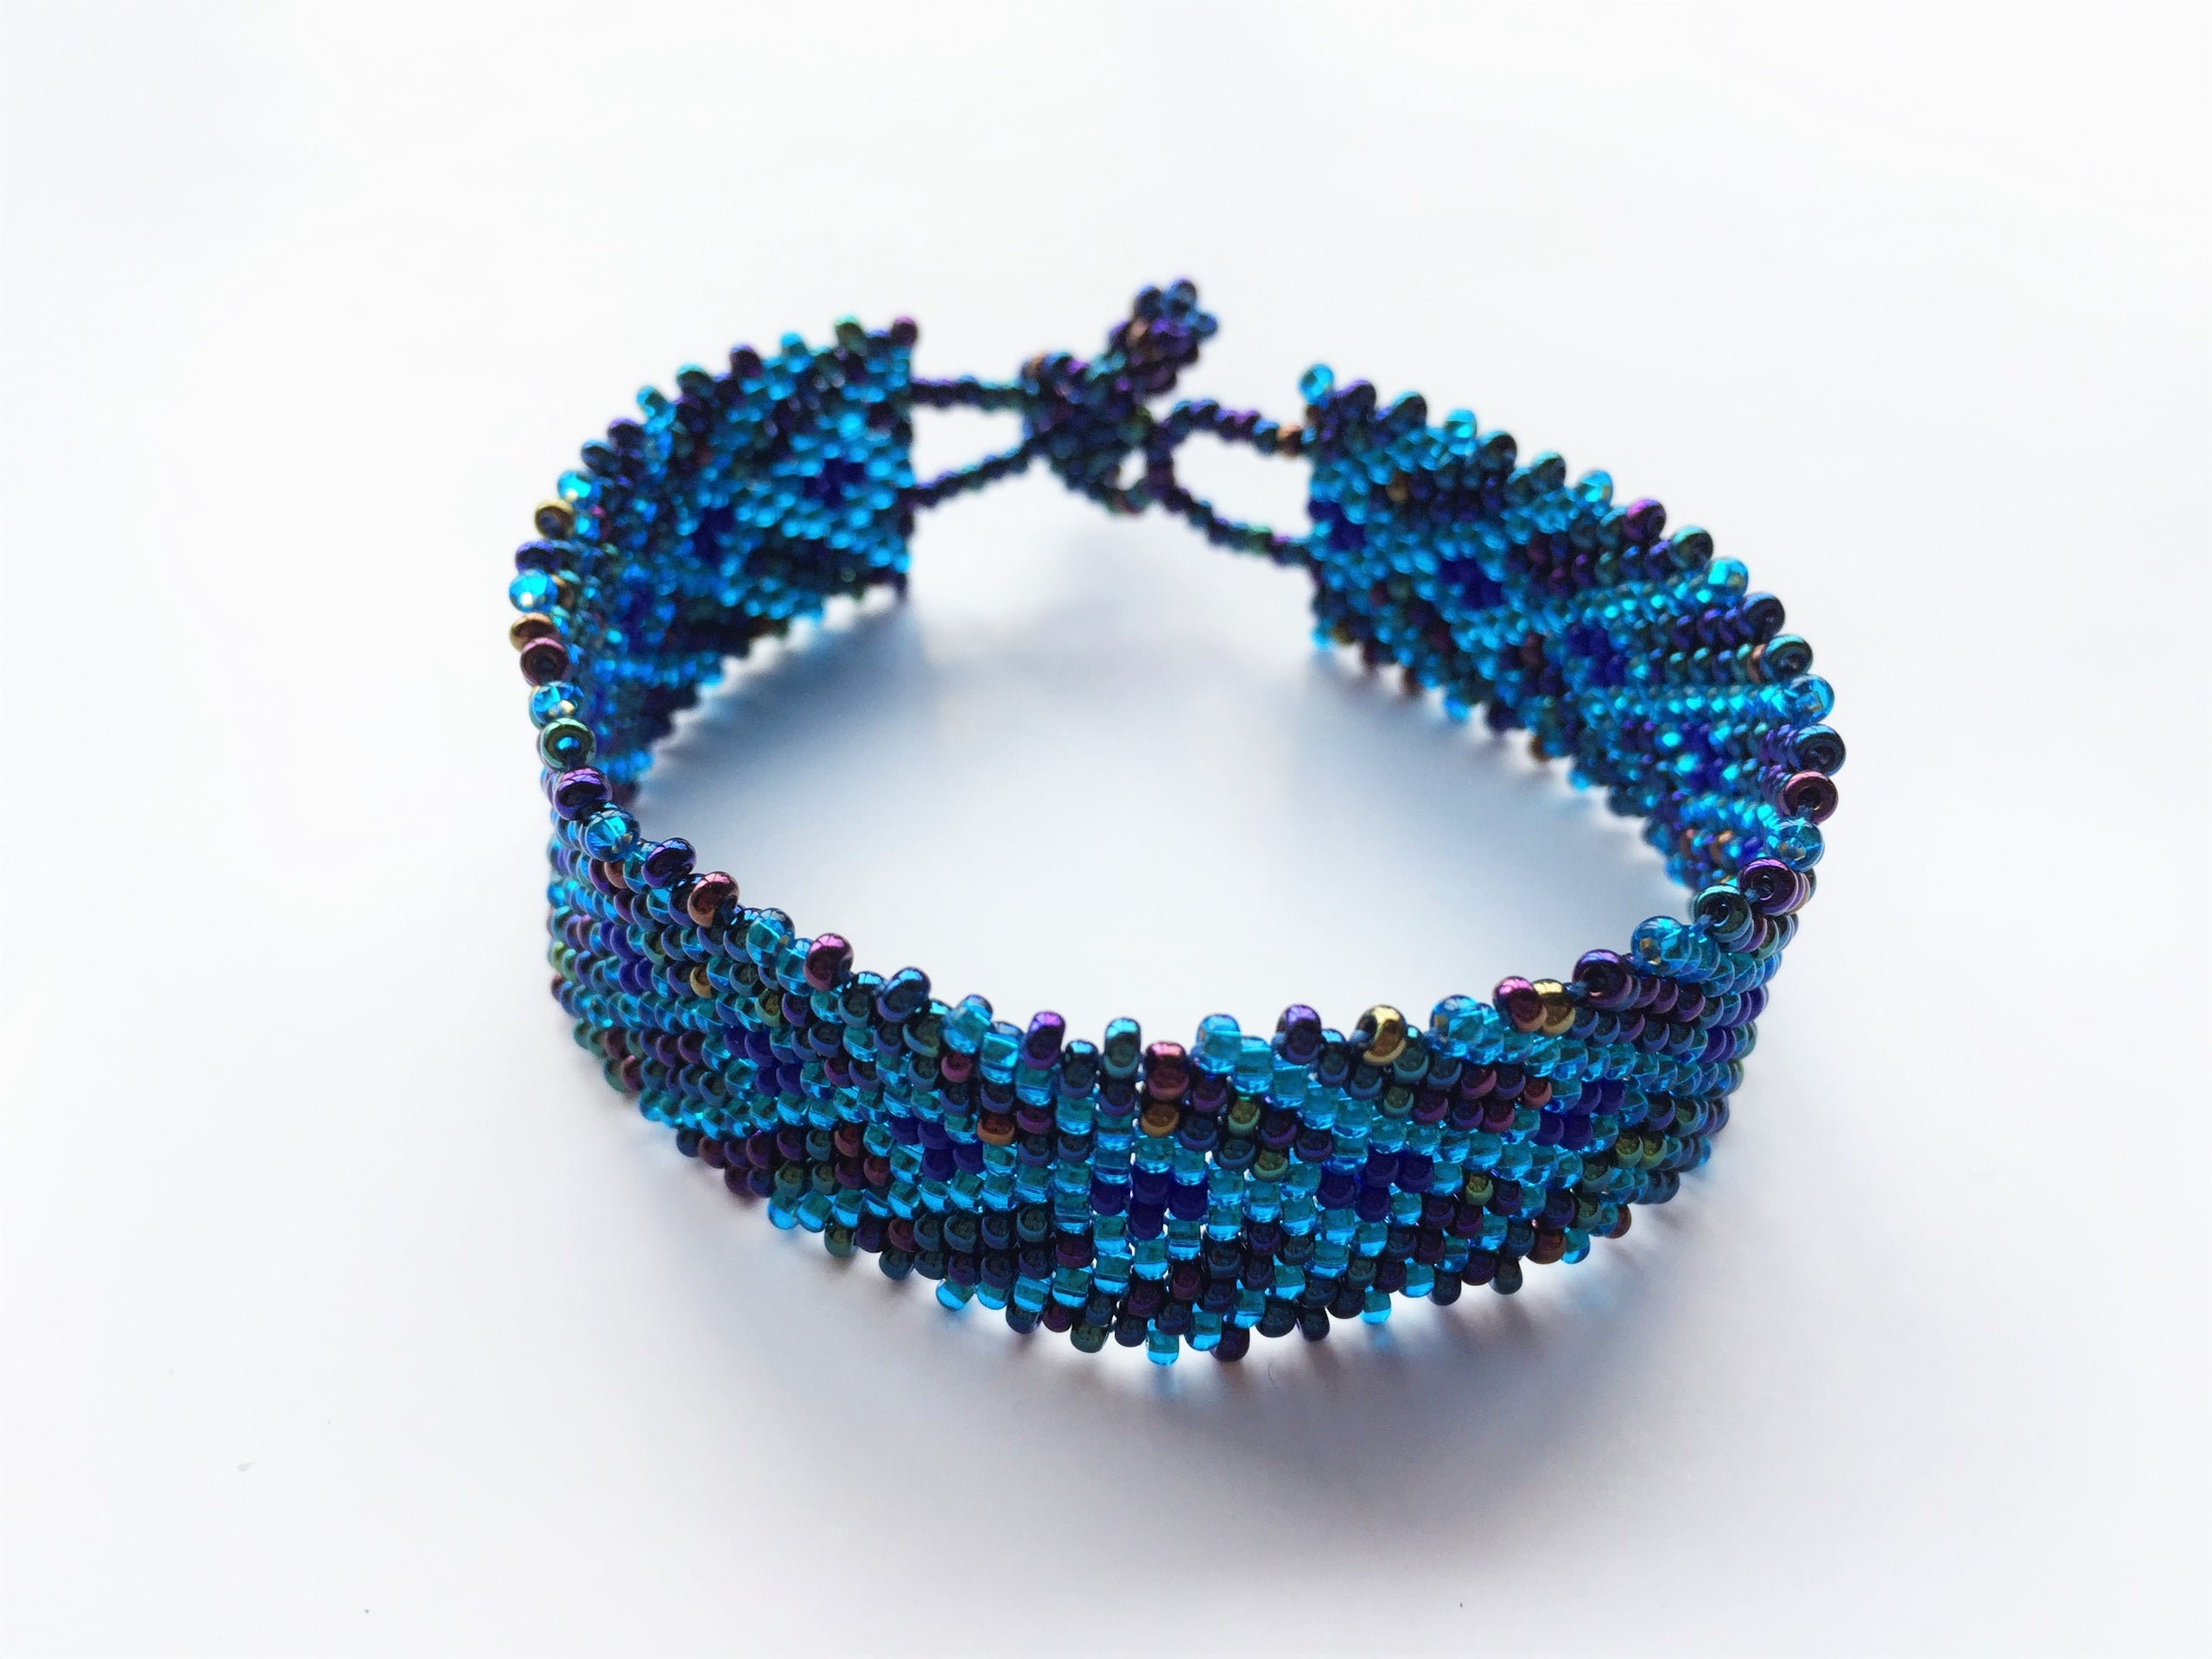 CHEVRON-AND-ON BEADS AND BRACELET KITS